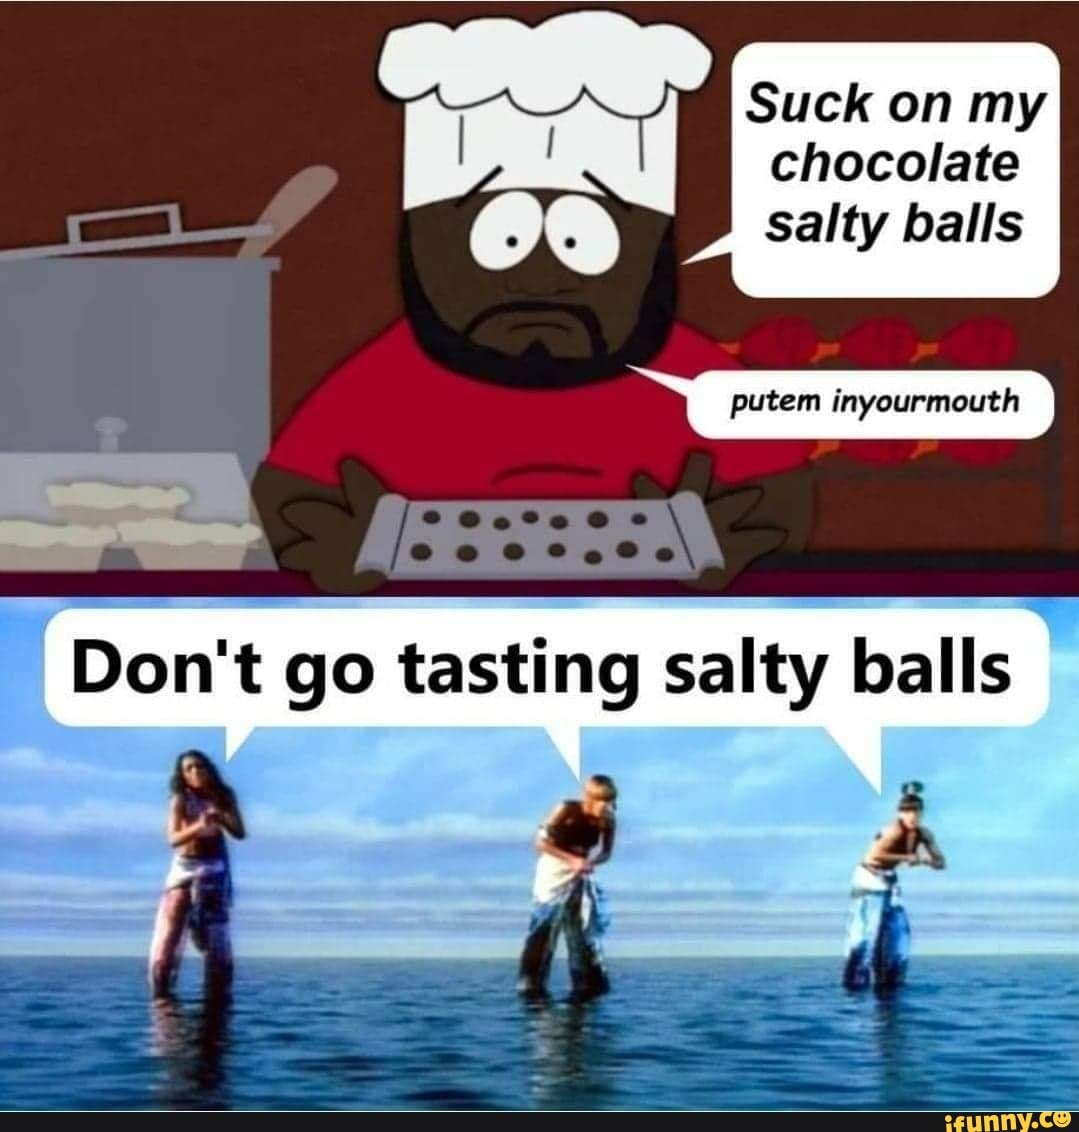 south park chef chocolate salty balls